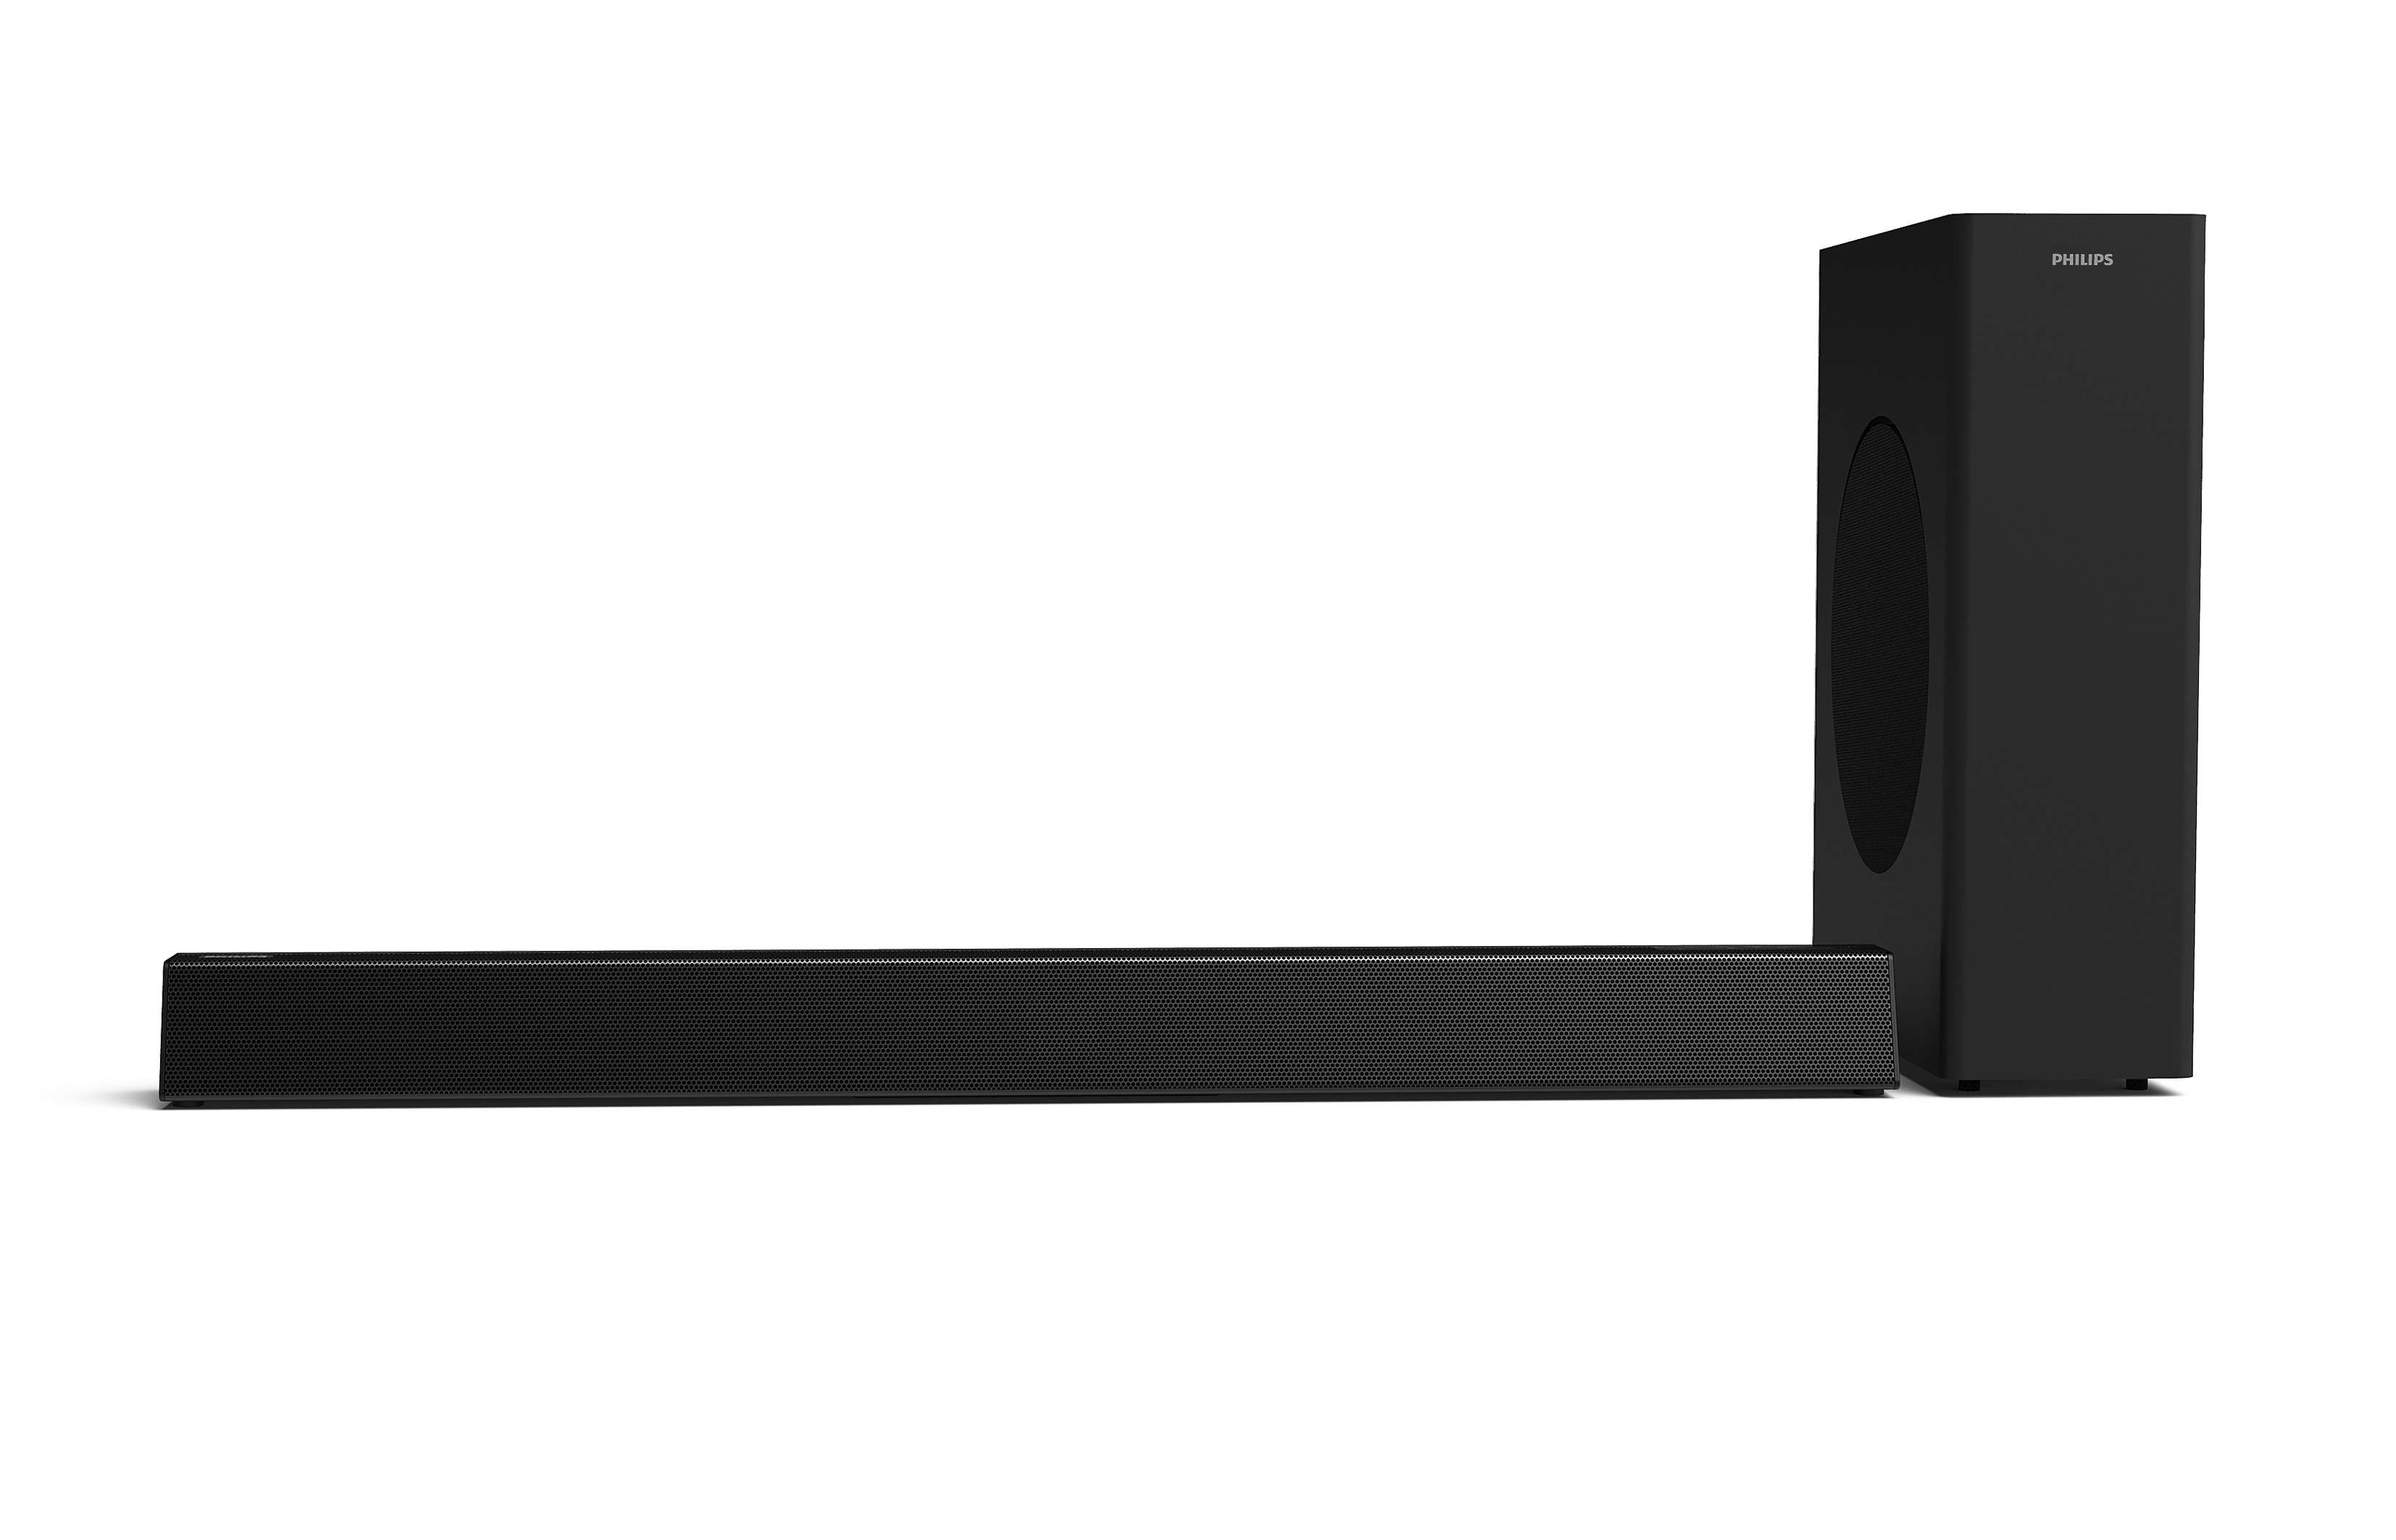 50% OFF Philips HTL3320 3.1 Channel Dolby Audio Soundbar with Wireless Subwoofer, HDMI ARC and Bluetooth Streaming $149